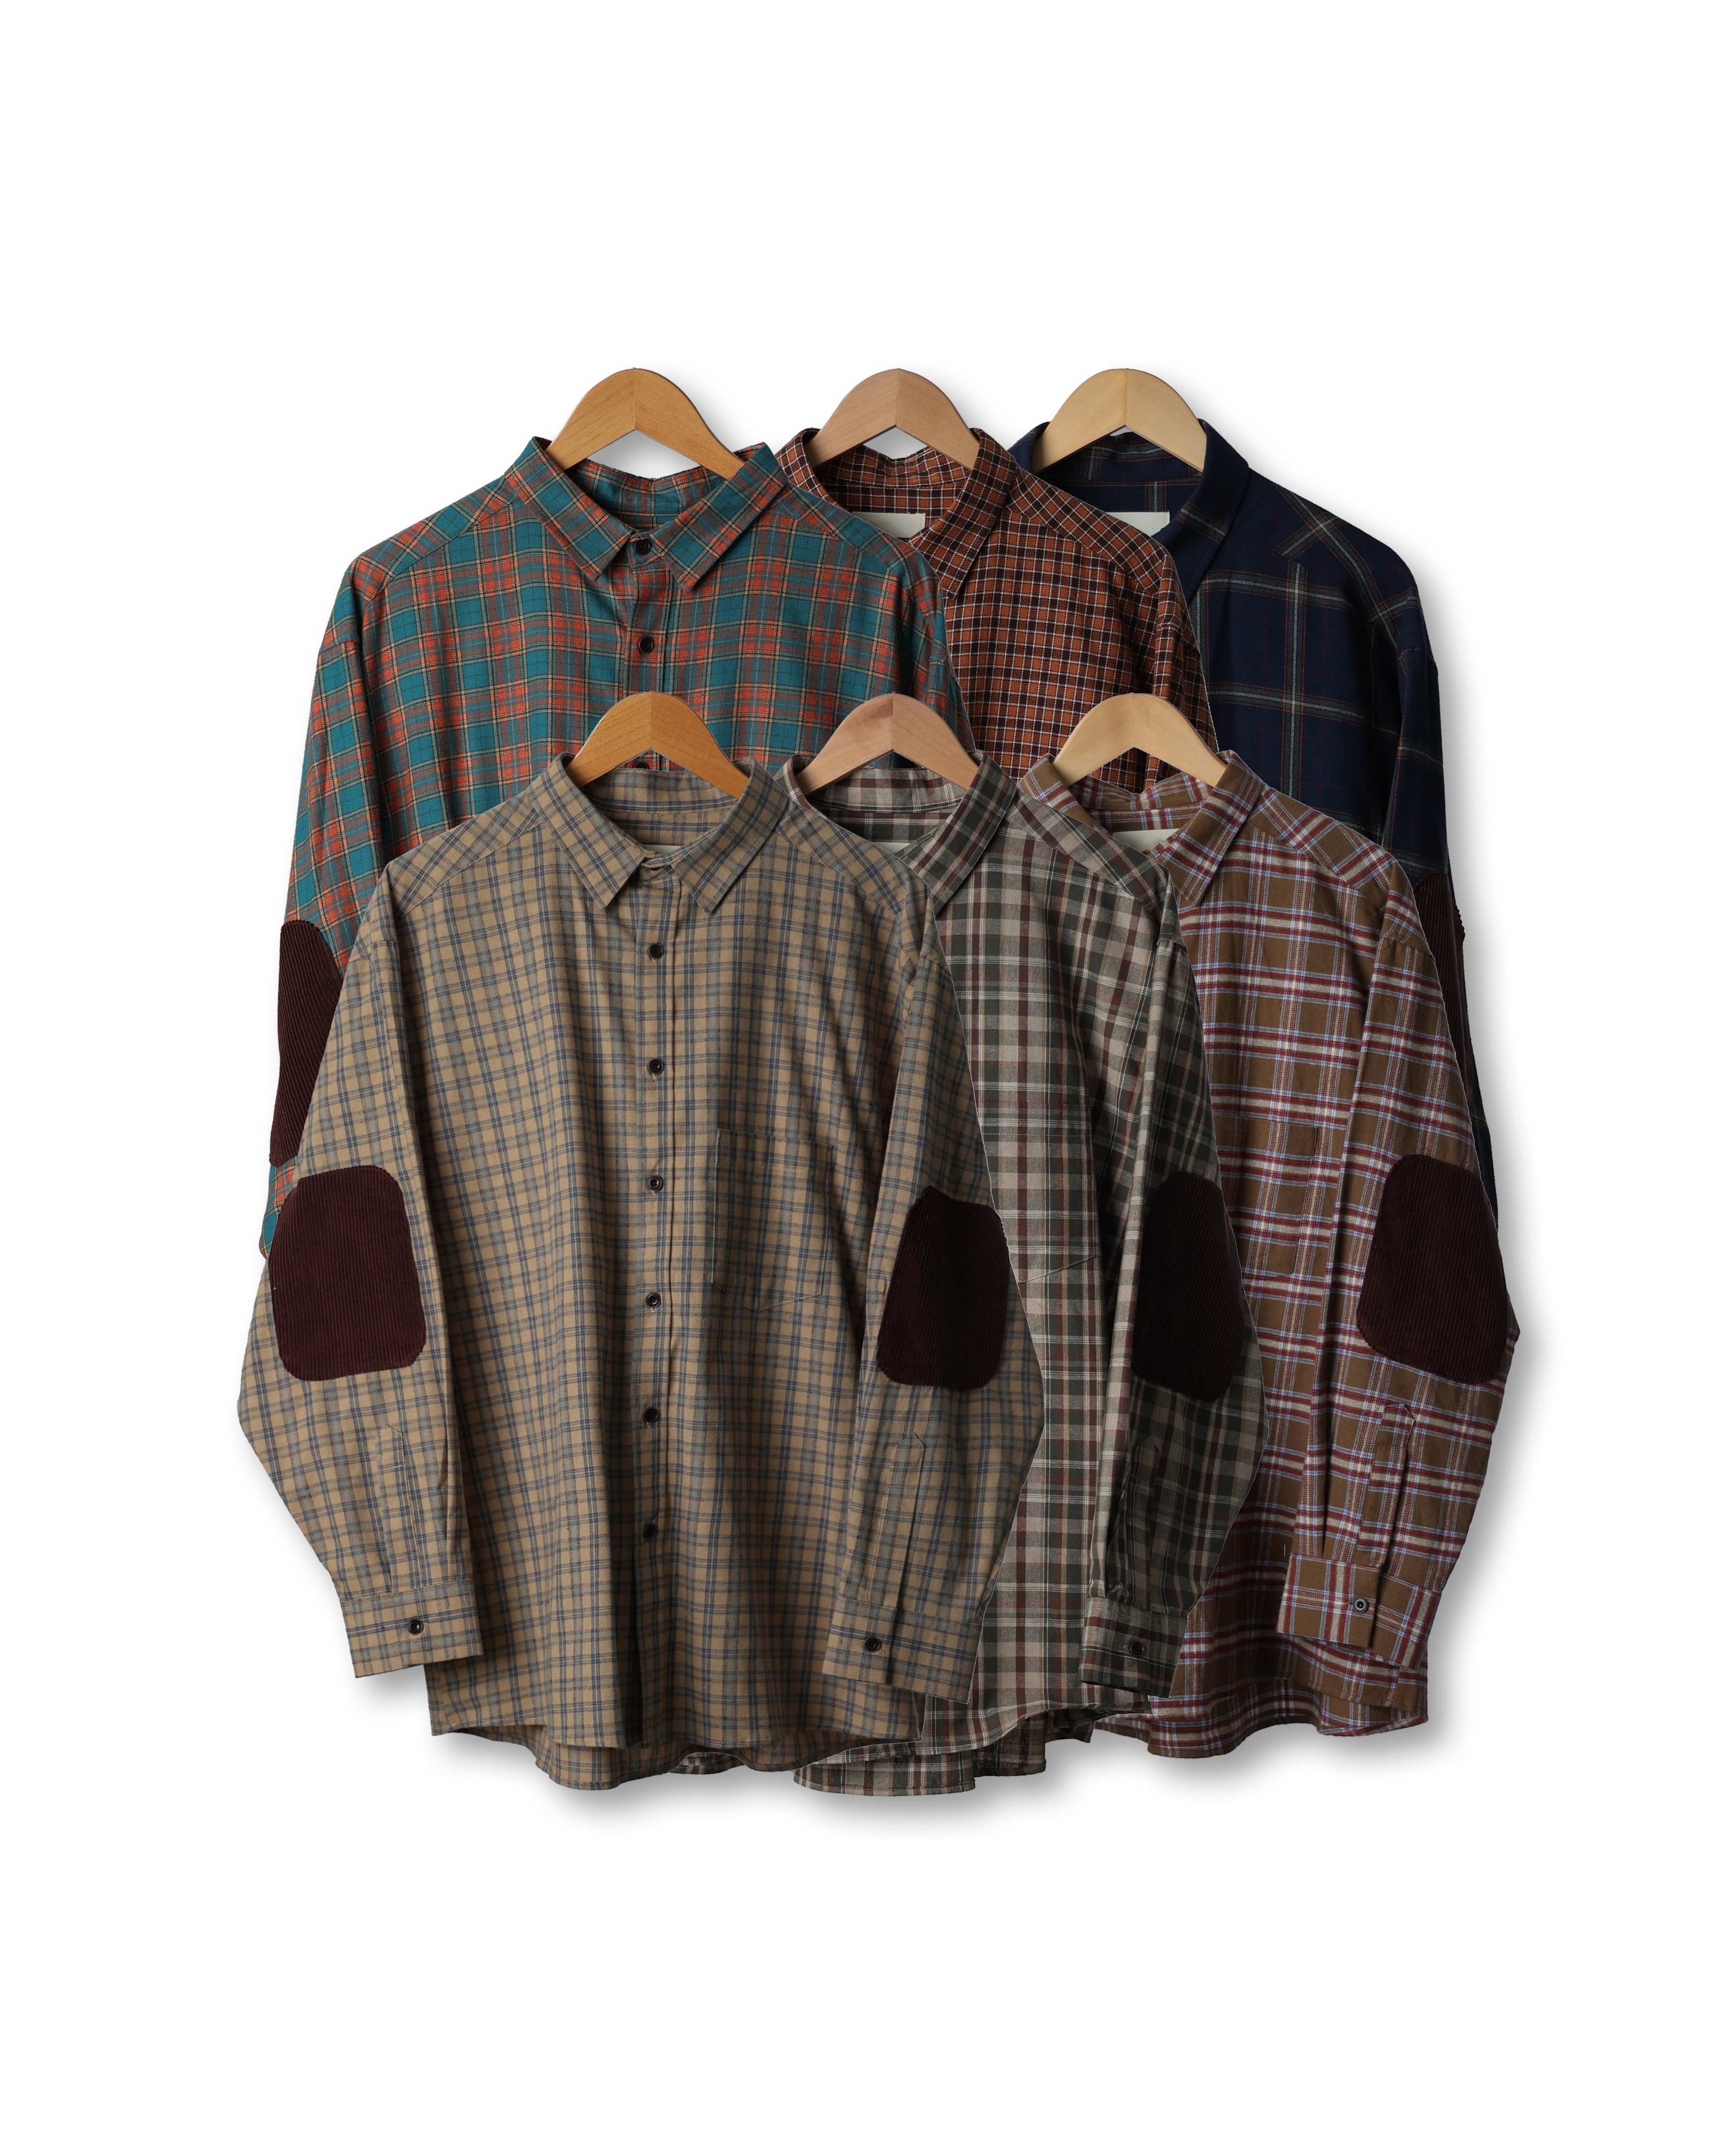 LIBERT RAY Patched Over Check Shirts (Navy/Green/Camel/Brown/Olive/Beige)